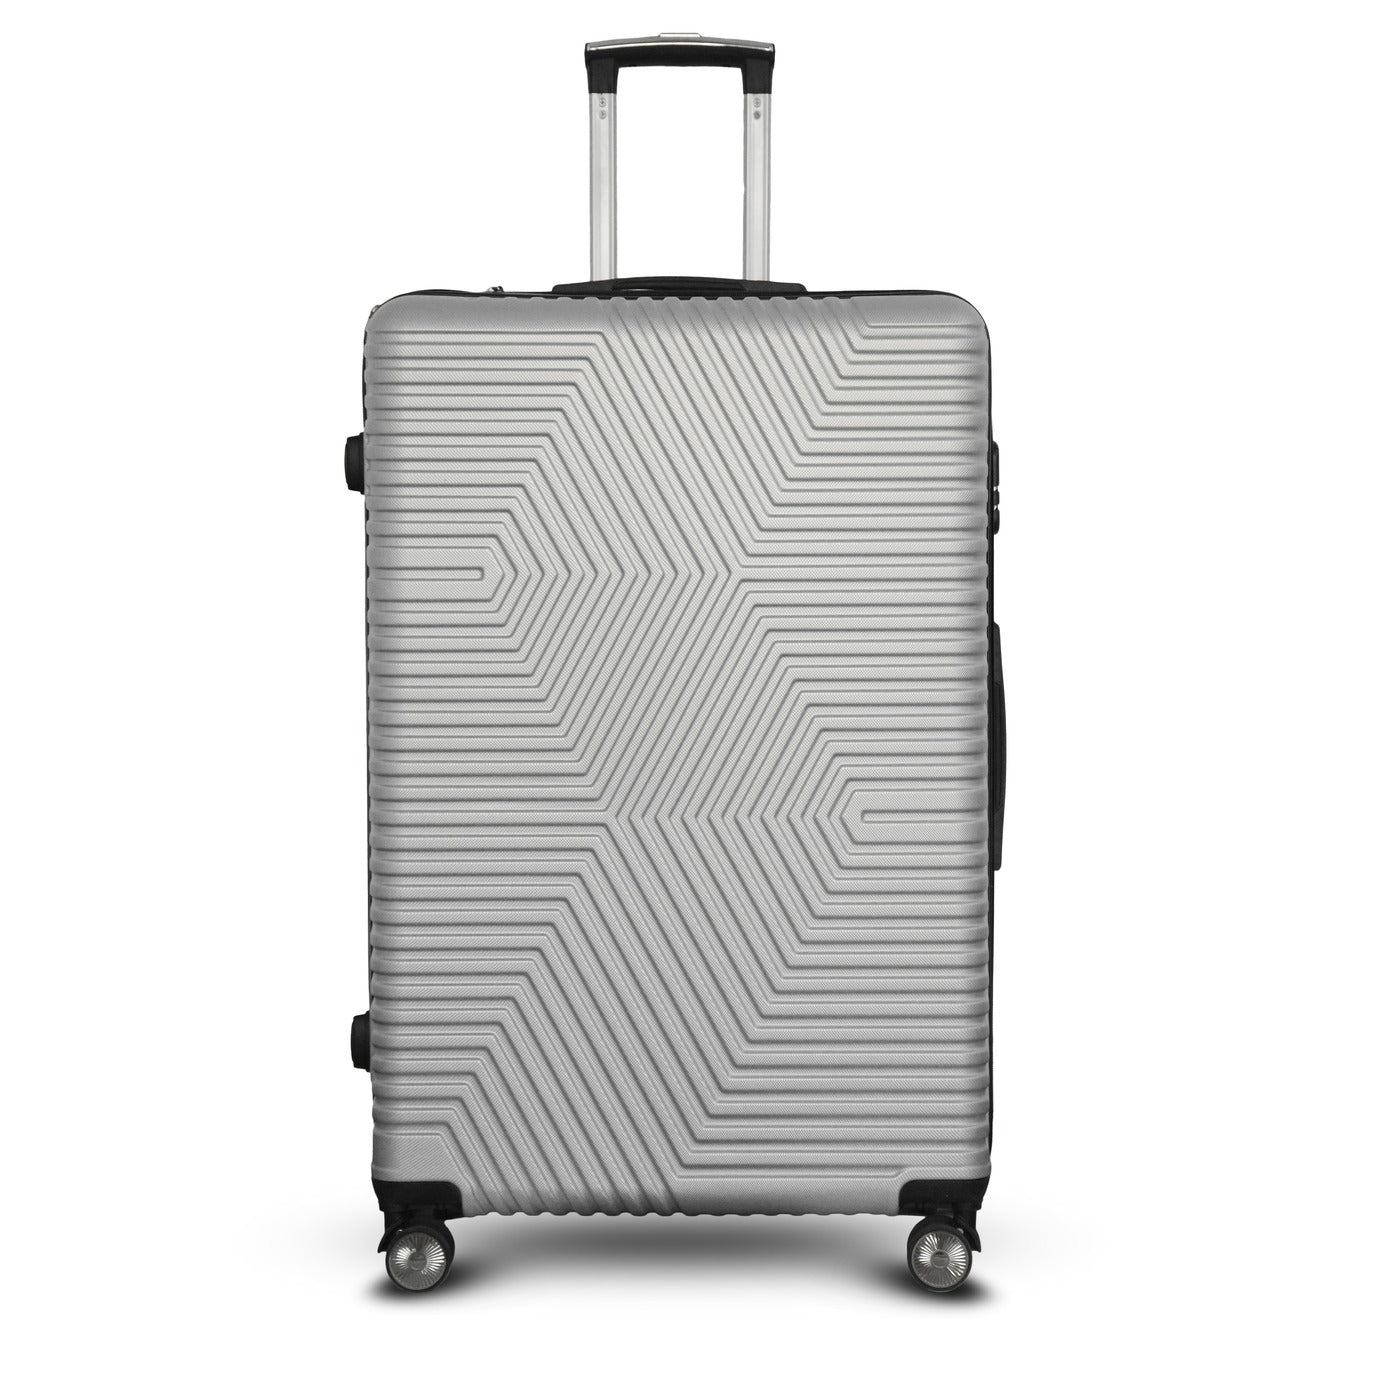 28" Zig Zag ABS Lightweight Luggage Bag With Double Spinner Wheel